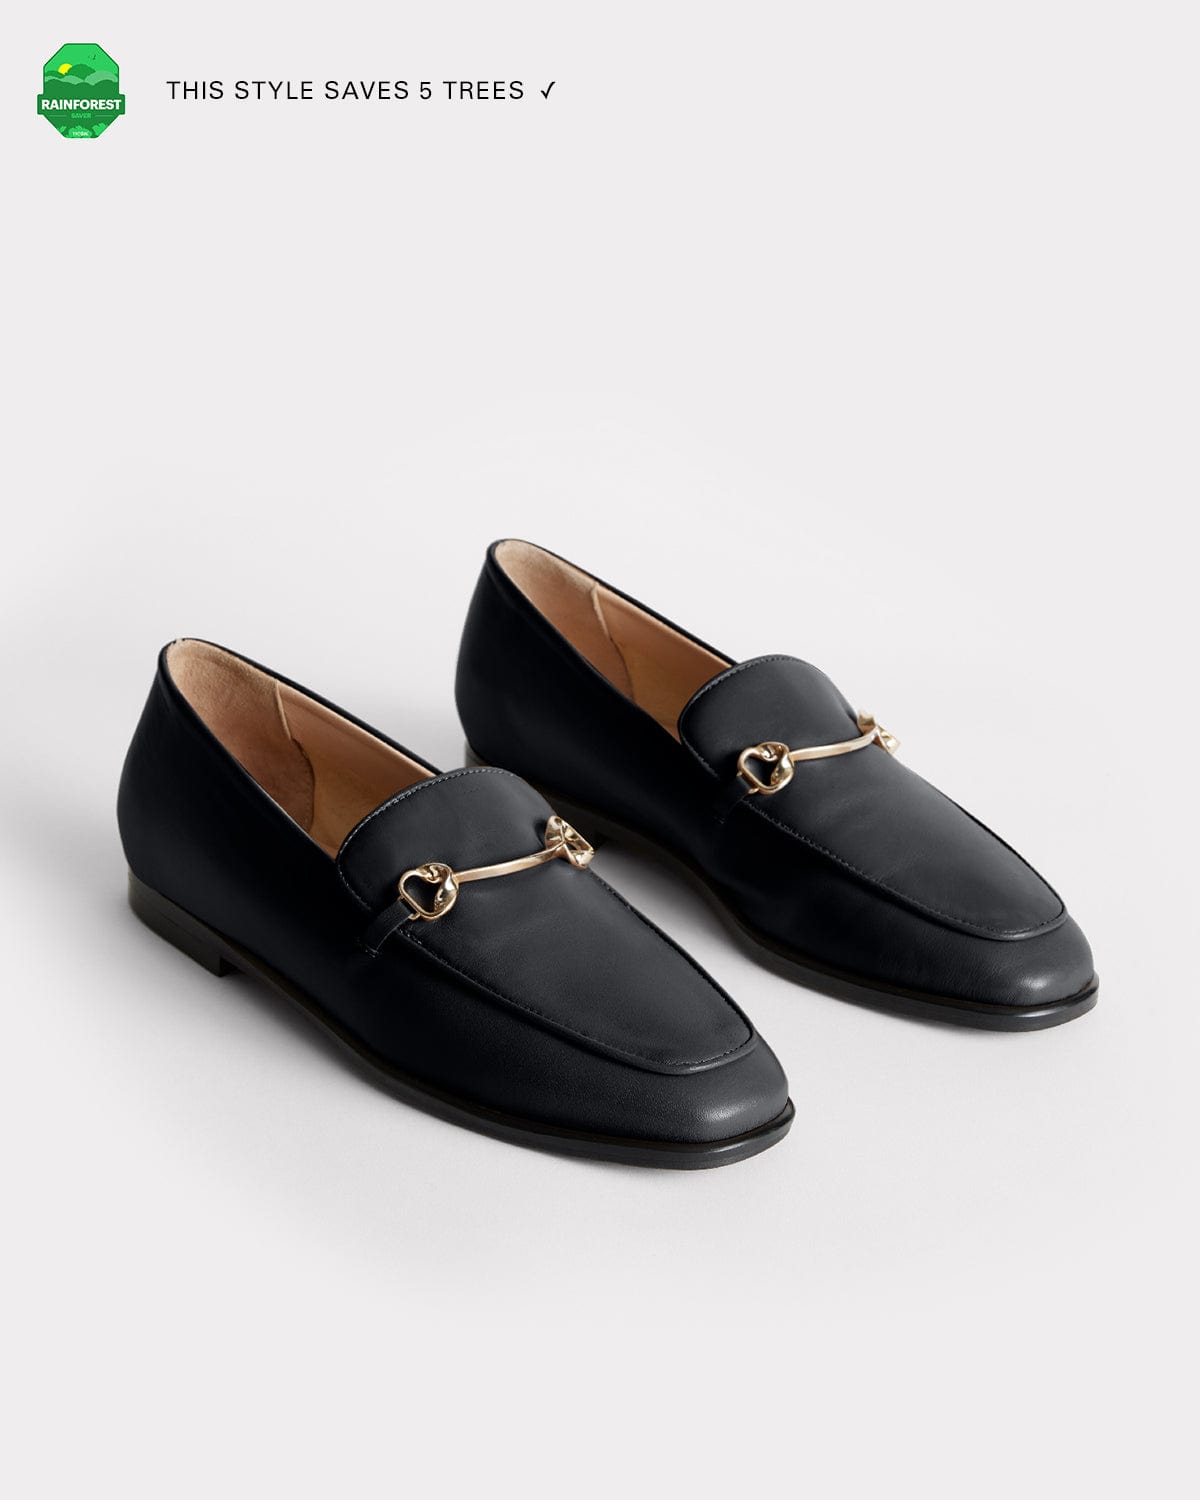 PRE-ORDER The Modern Moccasin Black With Hardware